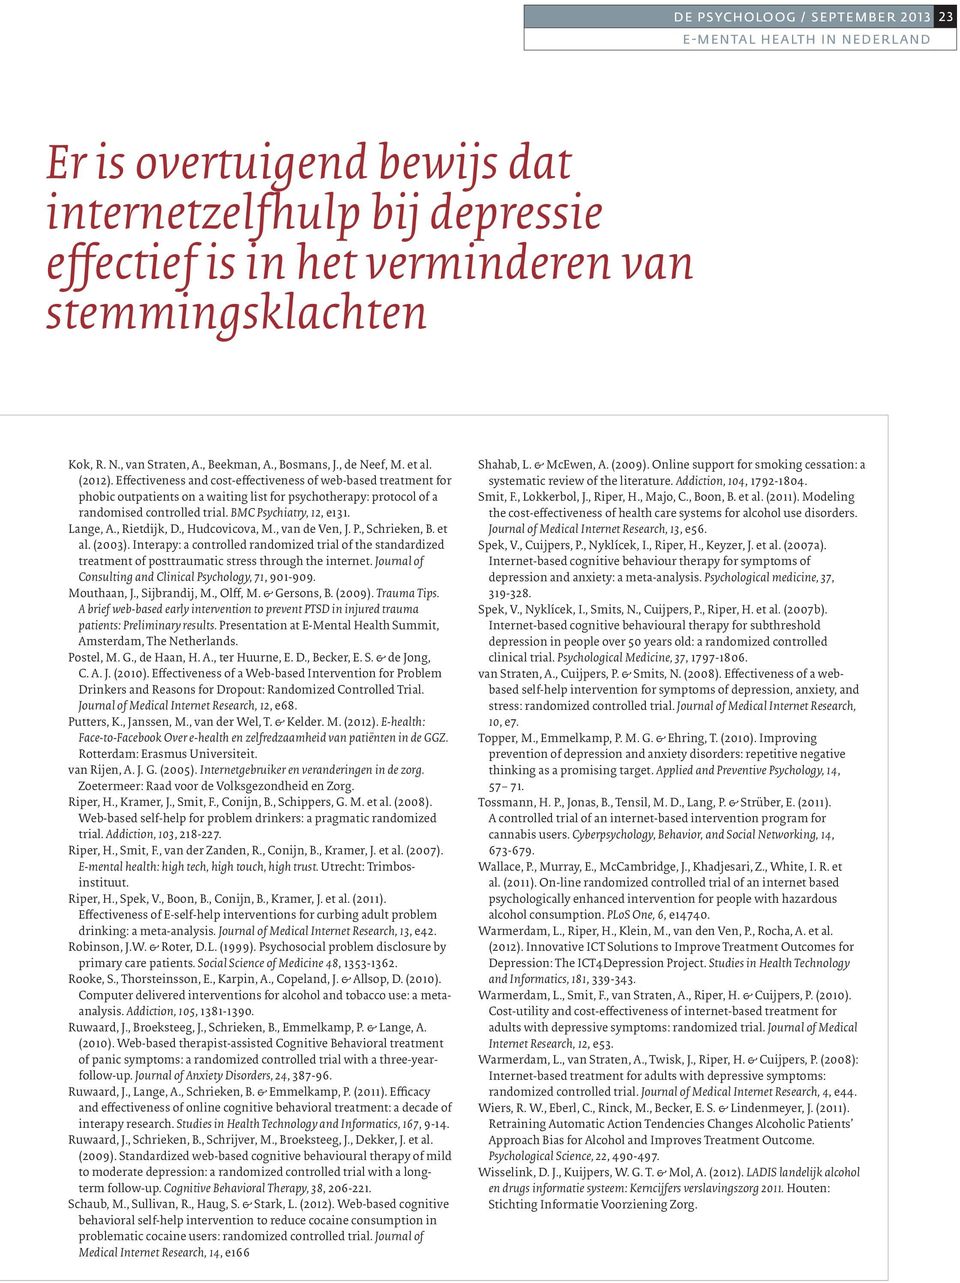 Effectiveness and cost-effectiveness of web-based treatment for phobic outpatients on a waiting list for psychotherapy: protocol of a randomised controlled trial. BMC Psychiatry, 12, e131. Lange, A.